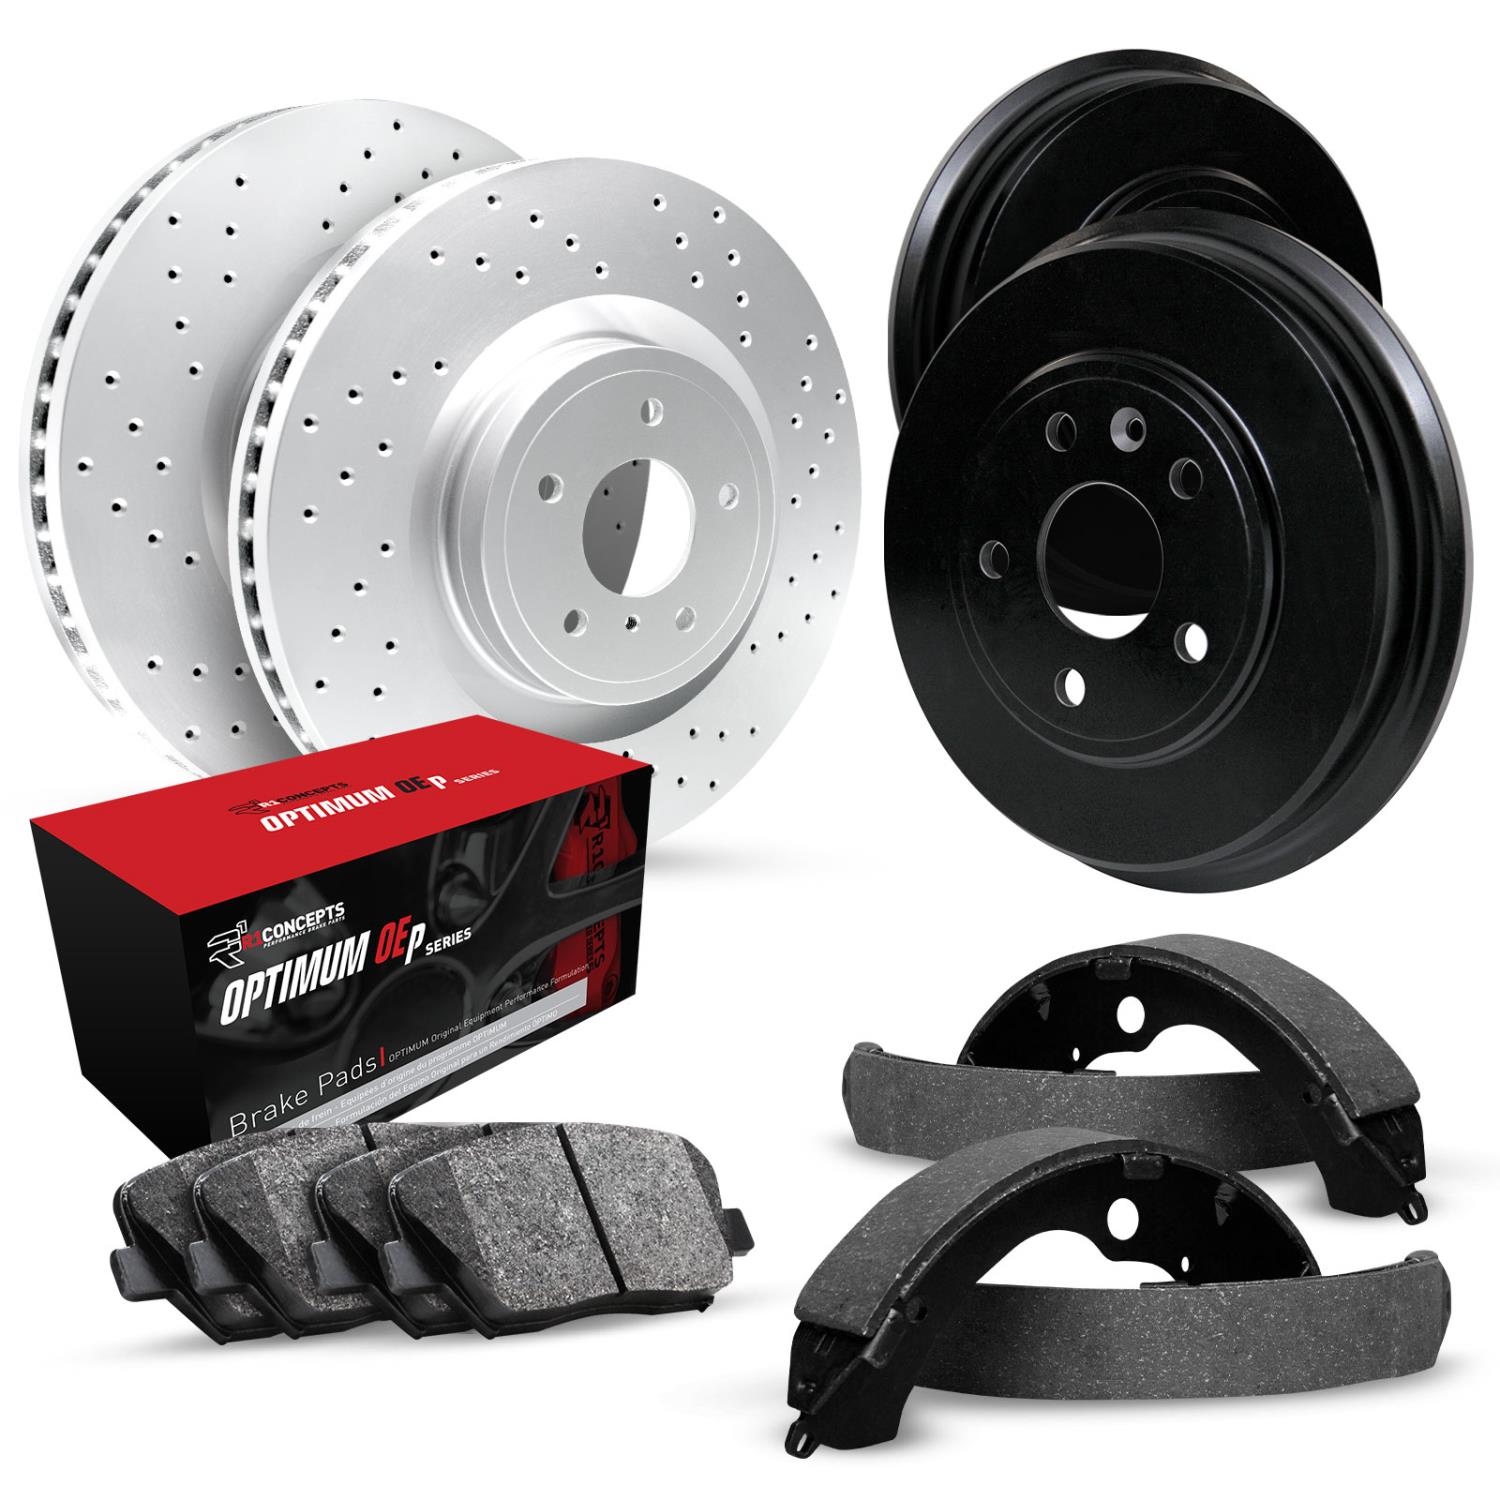 GEO-Carbon Drilled Brake Rotor & Drum Set w/Optimum OE Pads & Shoes, 1999-2001 Acura/Honda, Position: Front & Rear